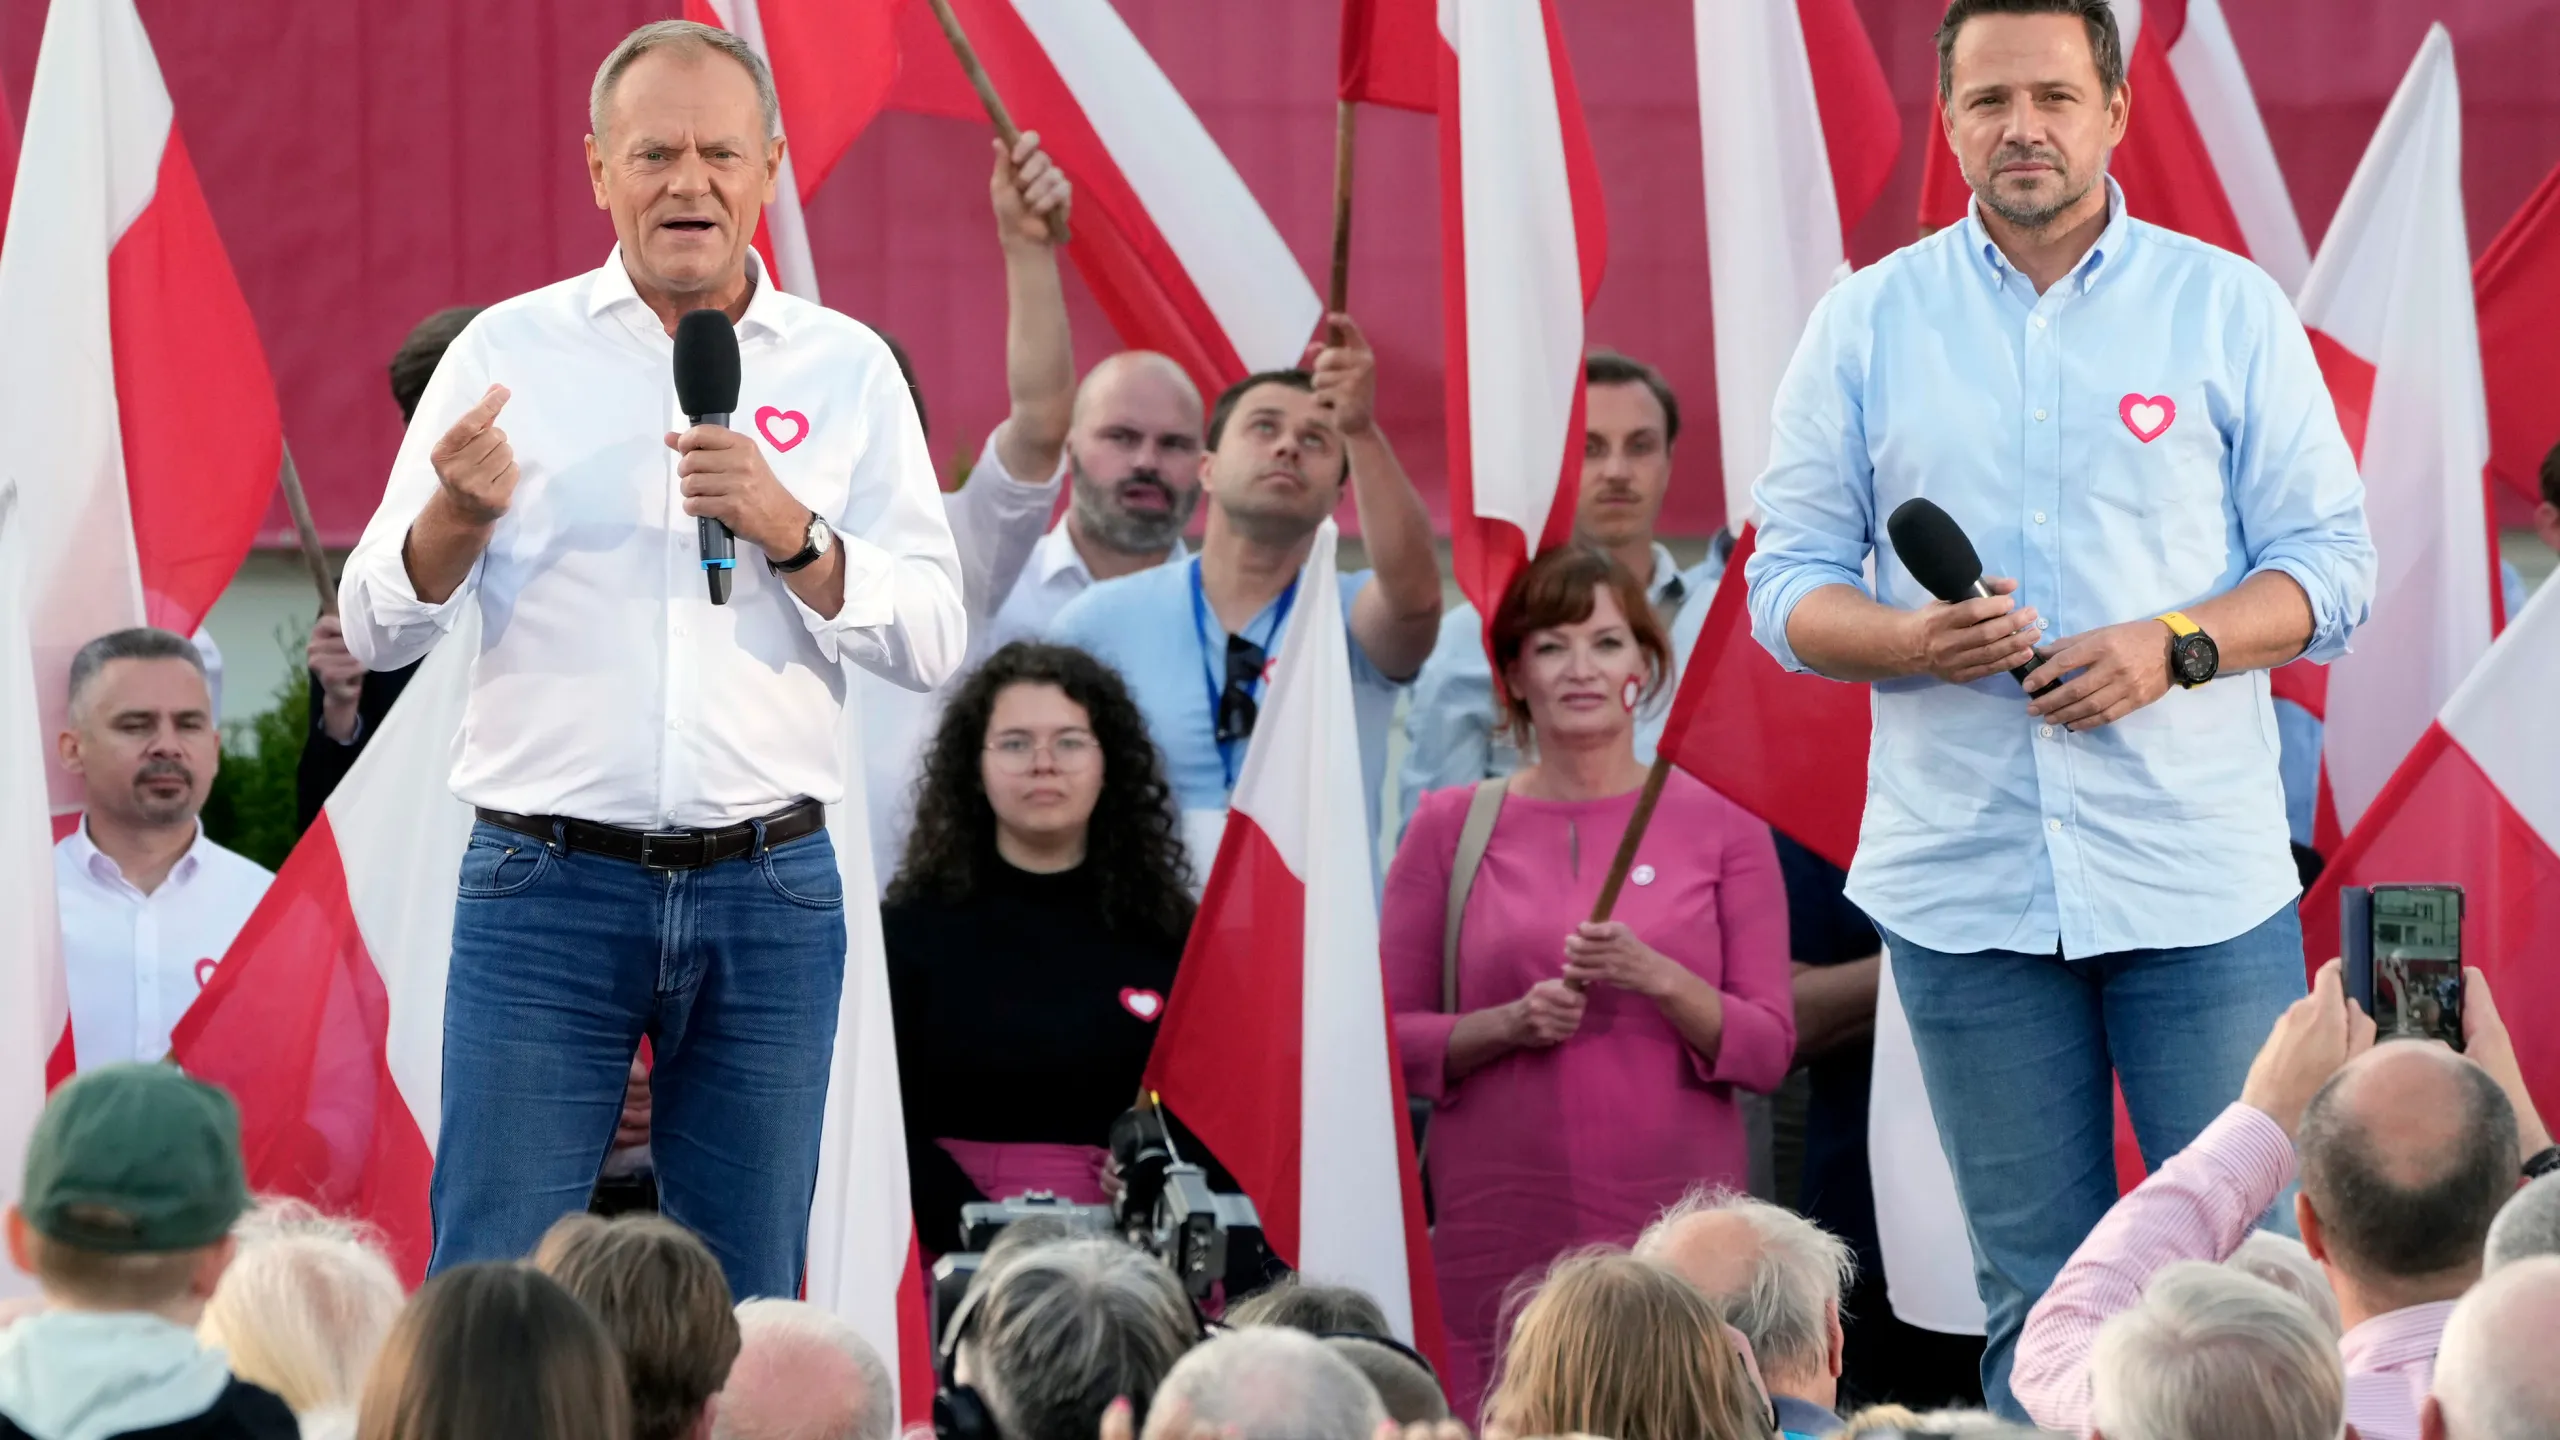 Donald Tusk woos female voters ahead of Poland’s election